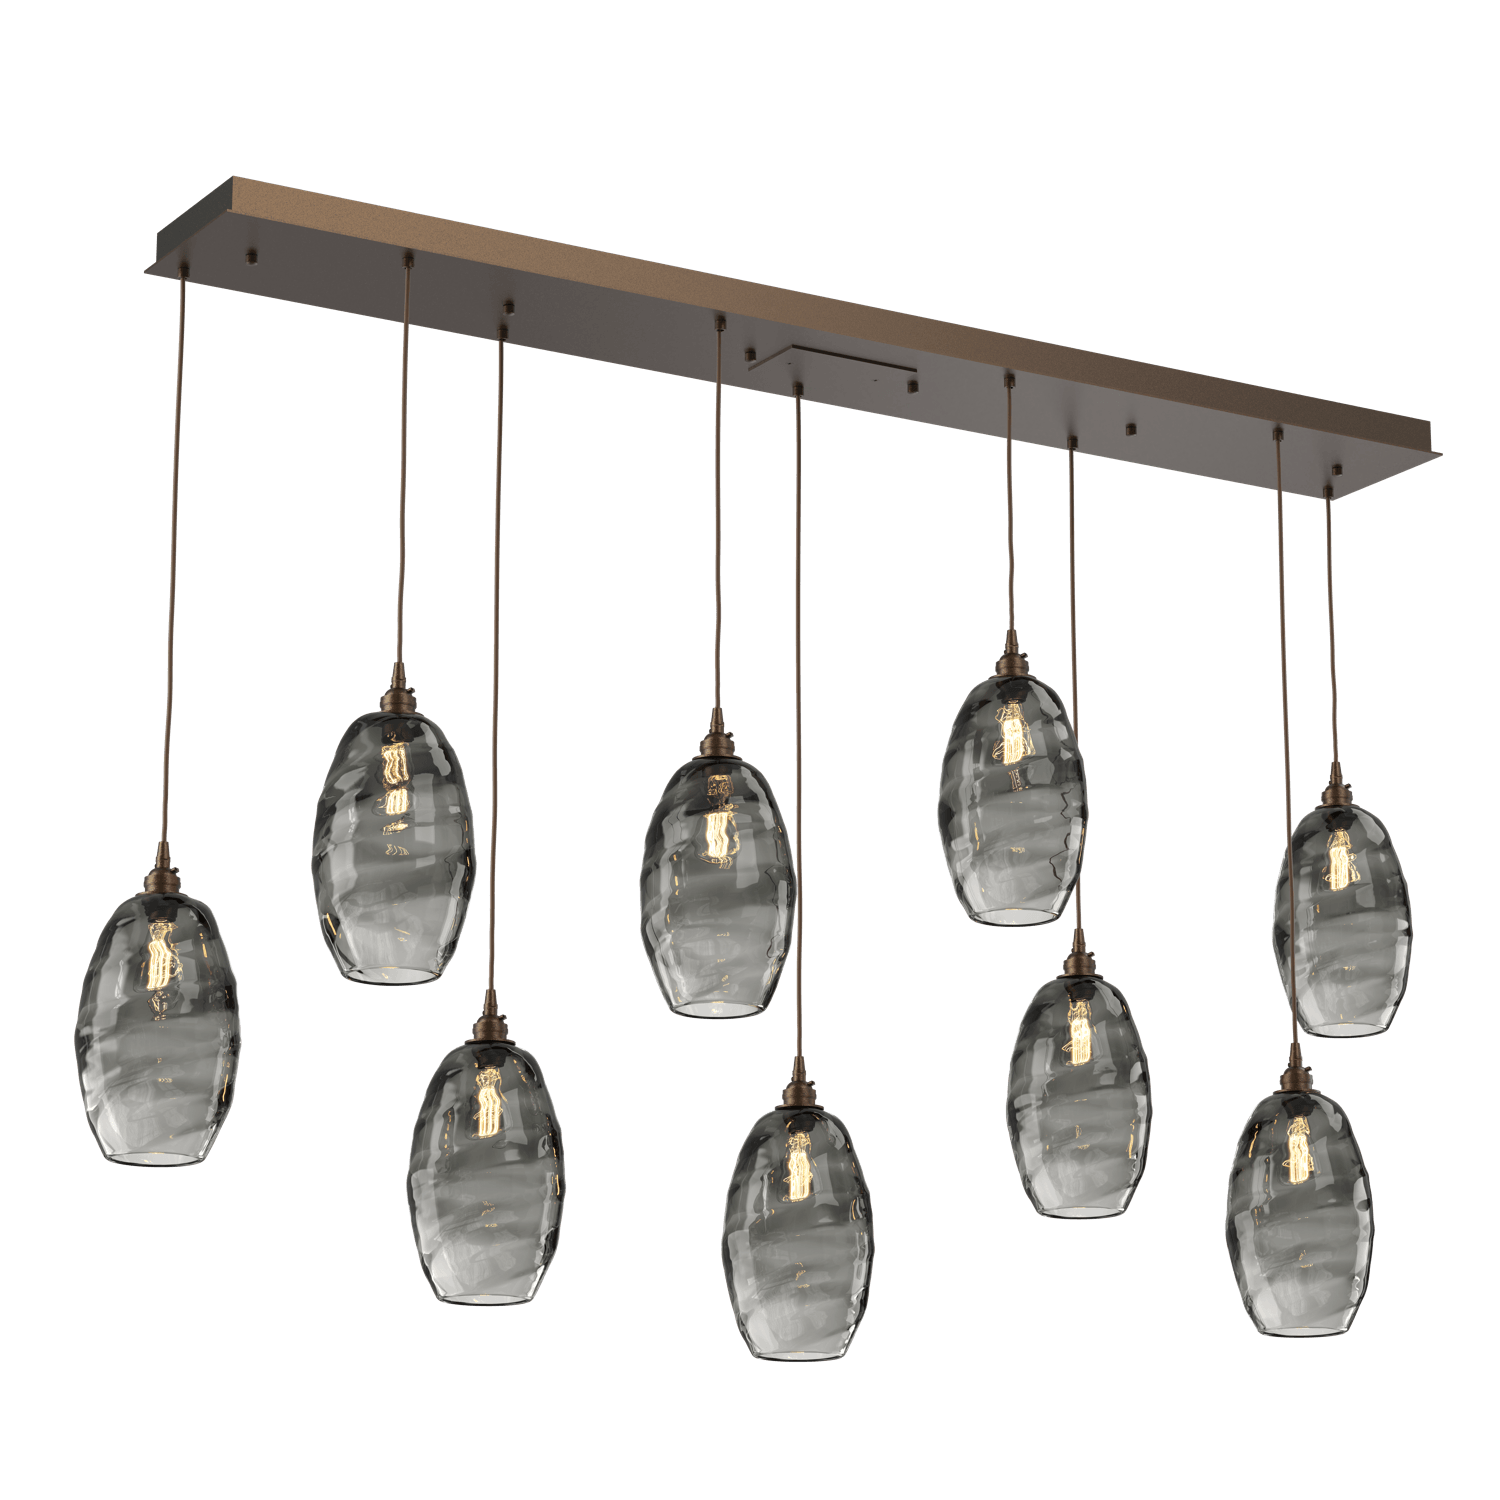 PLB0035-09-FB-OS-Hammerton-Studio-Optic-Blown-Glass-Elisse-9-light-linear-pendant-chandelier-with-flat-bronze-finish-and-optic-smoke-blown-glass-shades-and-incandescent-lamping